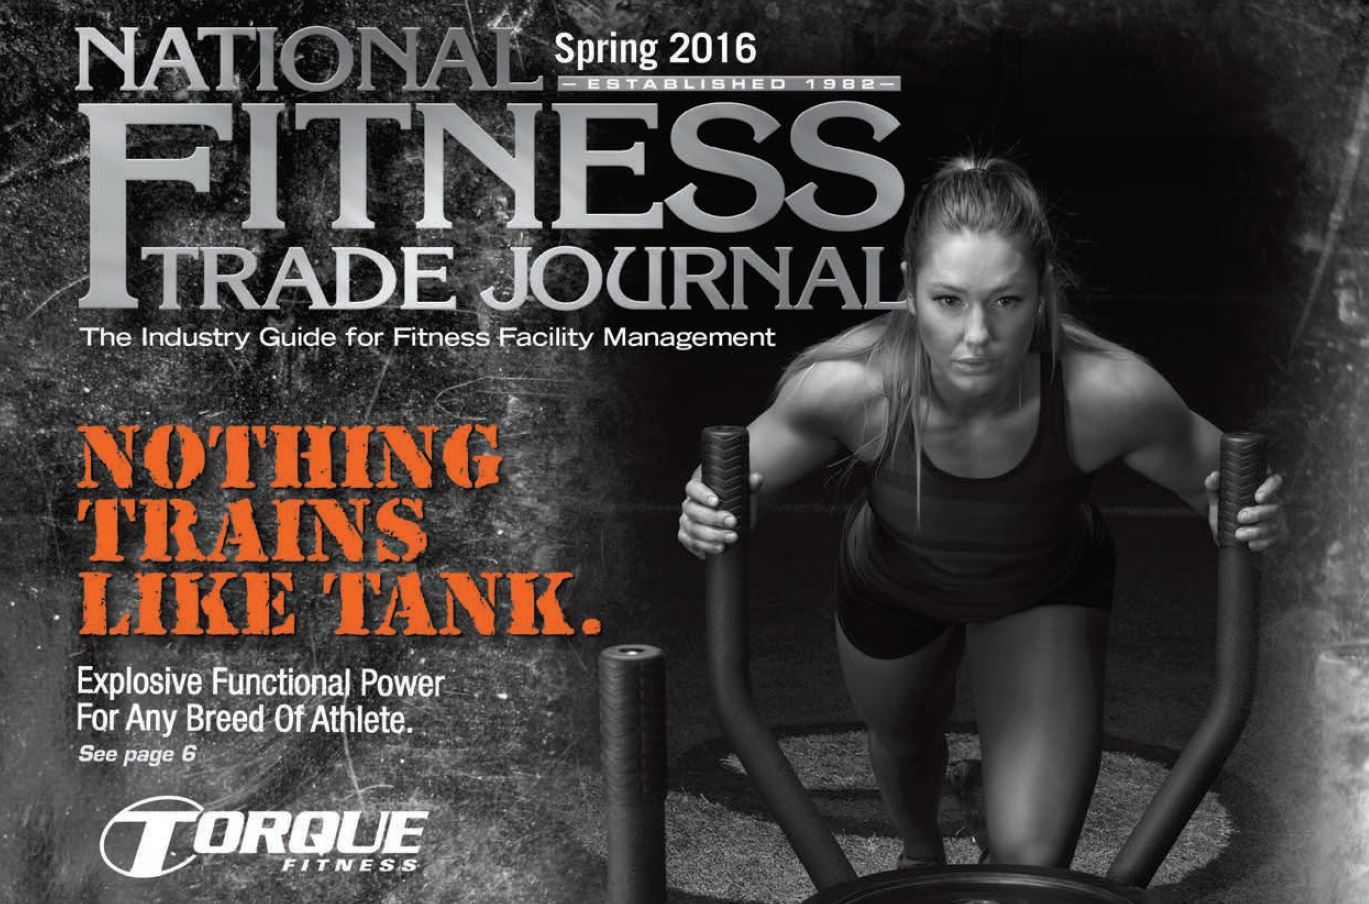 The all new TANK featured in The National Fitness Trade Journal